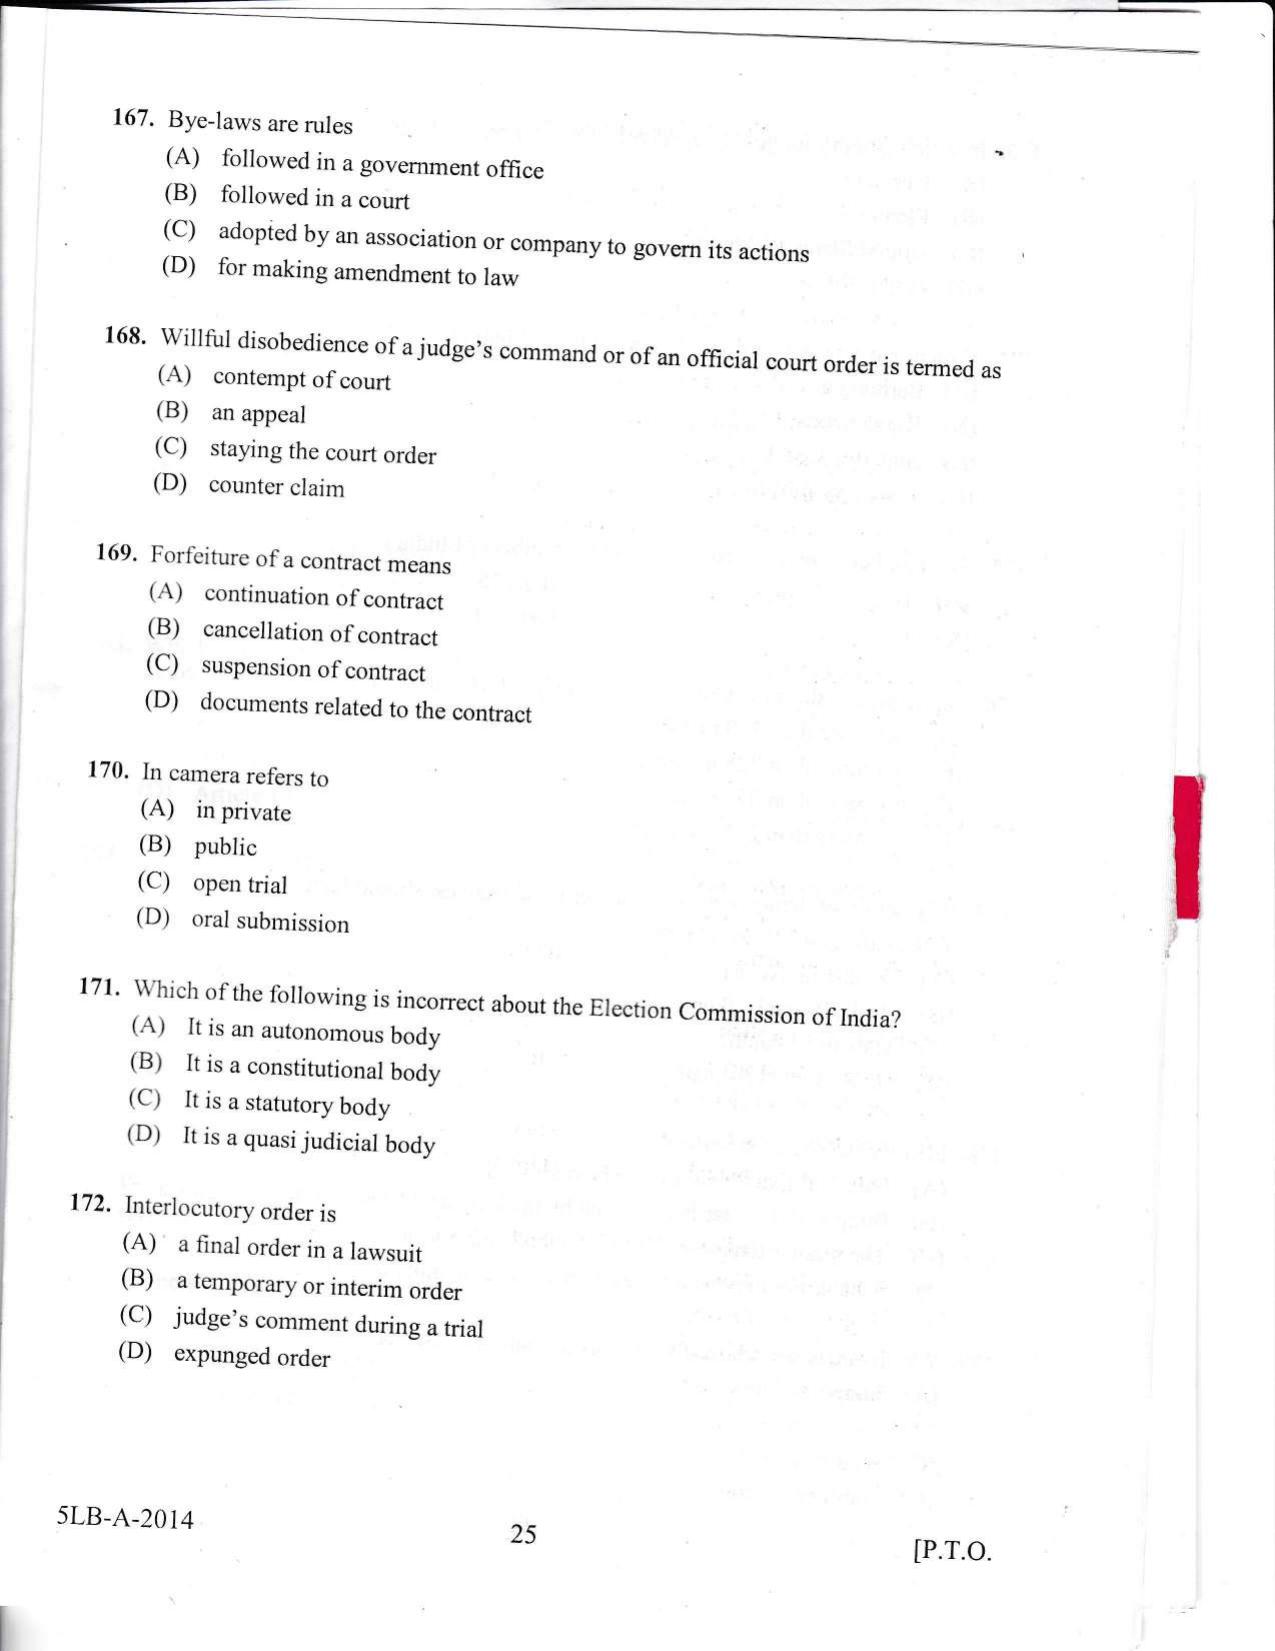 KLEE 5 Year LLB Exam 2014 Question Paper - Page 25